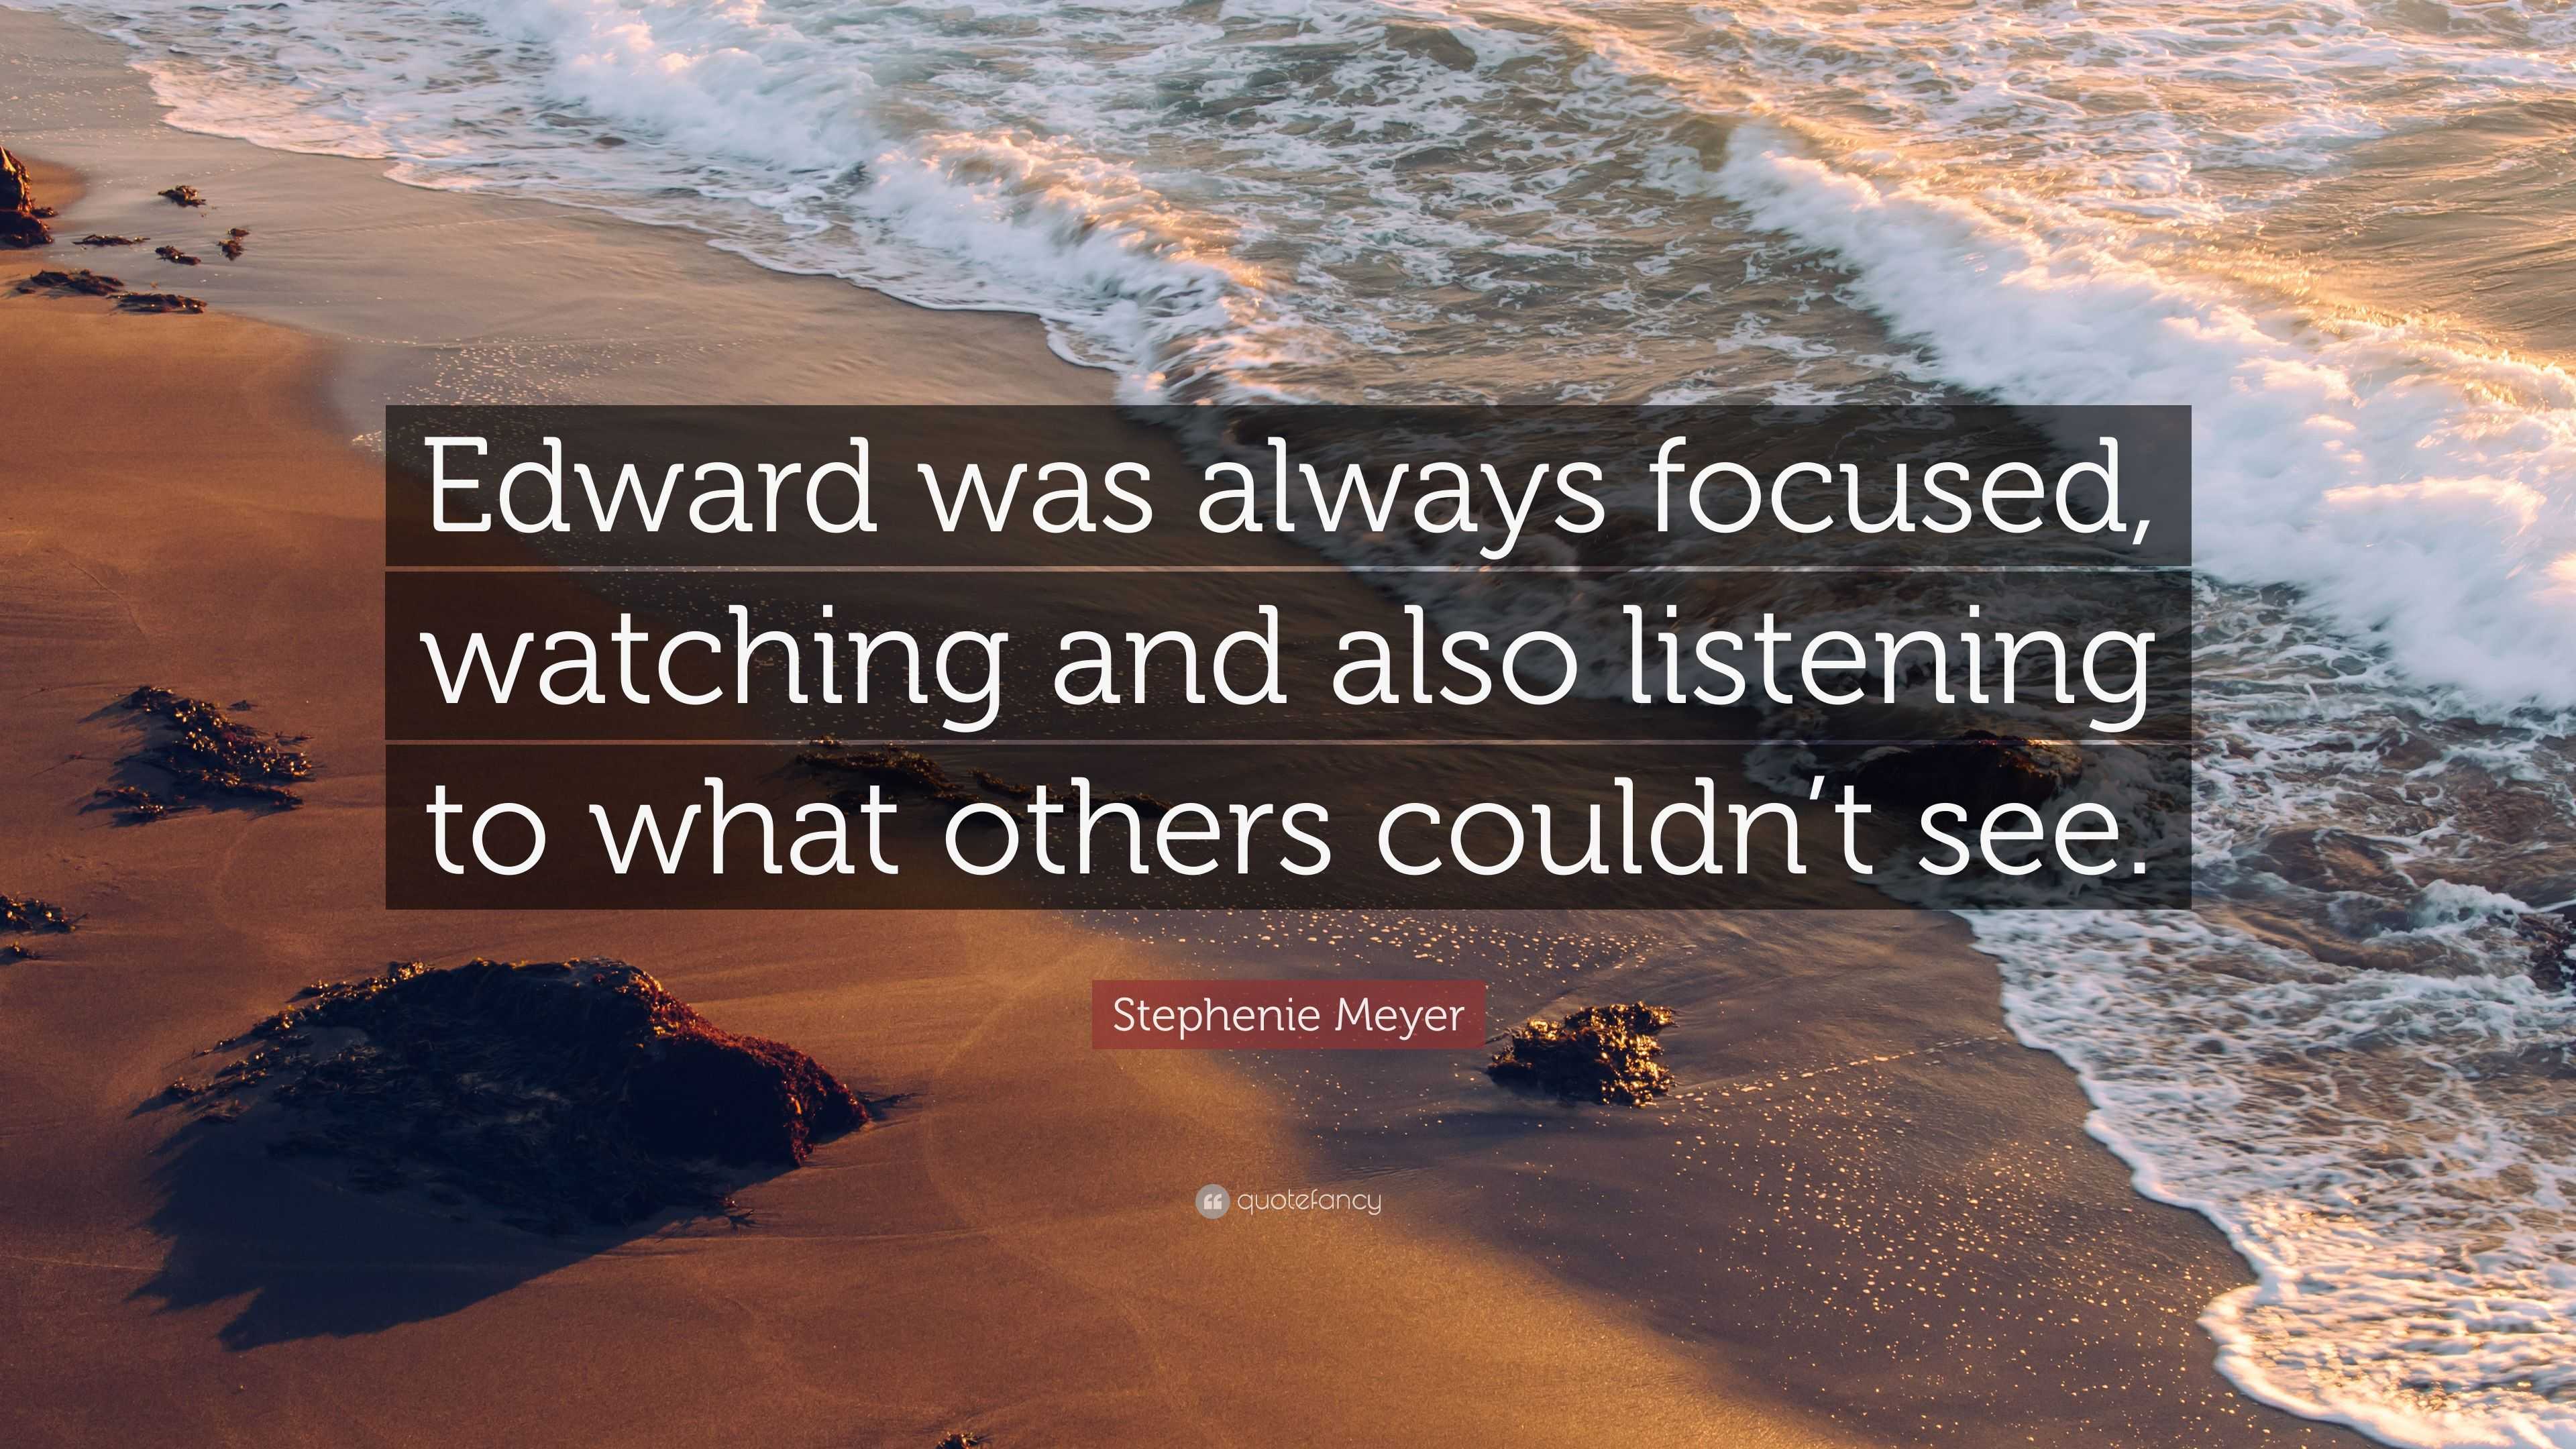 Stephenie Meyer Quote: “Edward was always focused, watching and also ...